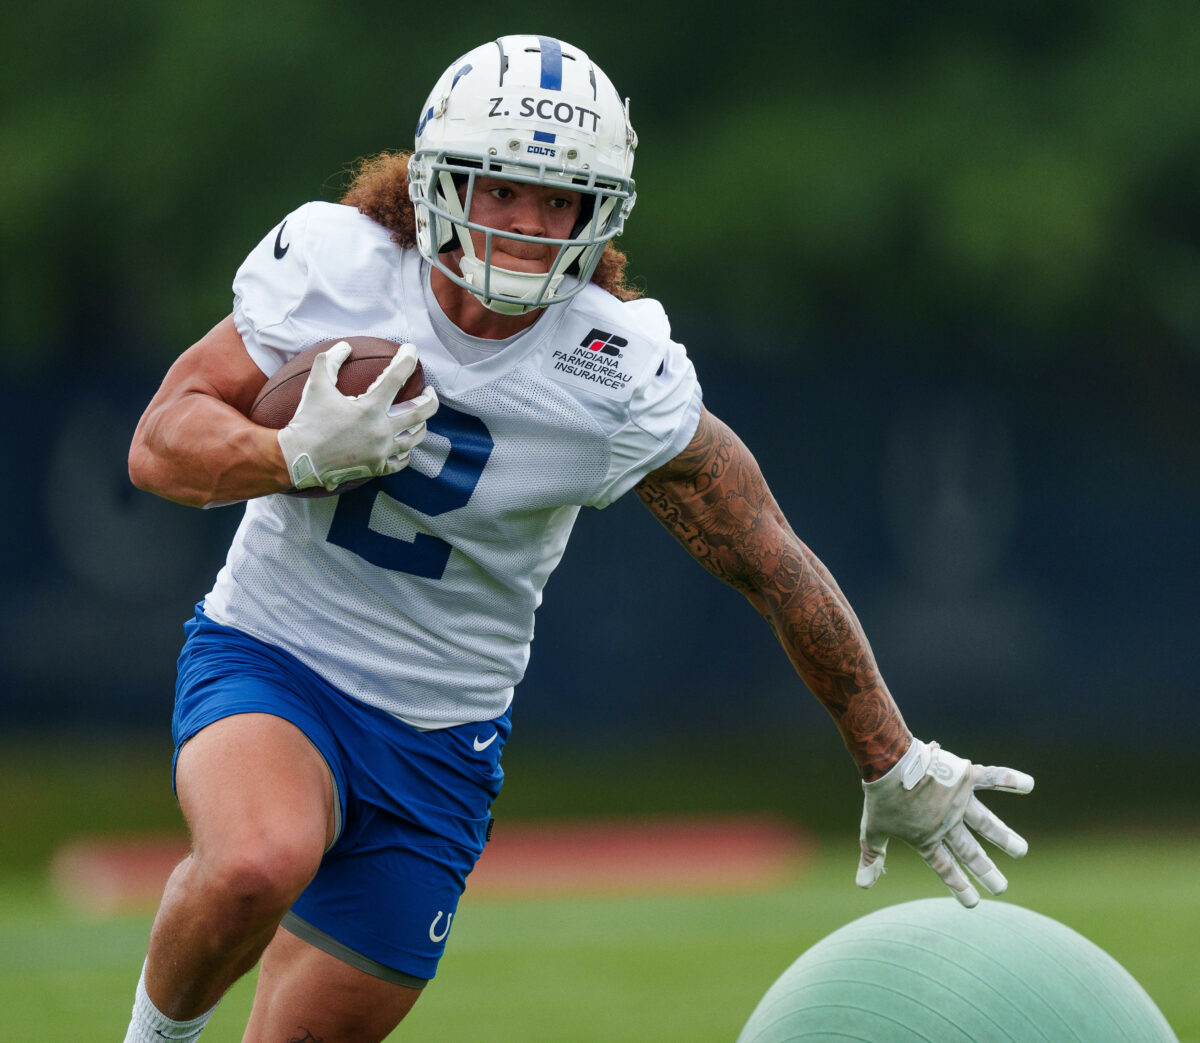 Colts waive RB Zavier Scott with injury settlement